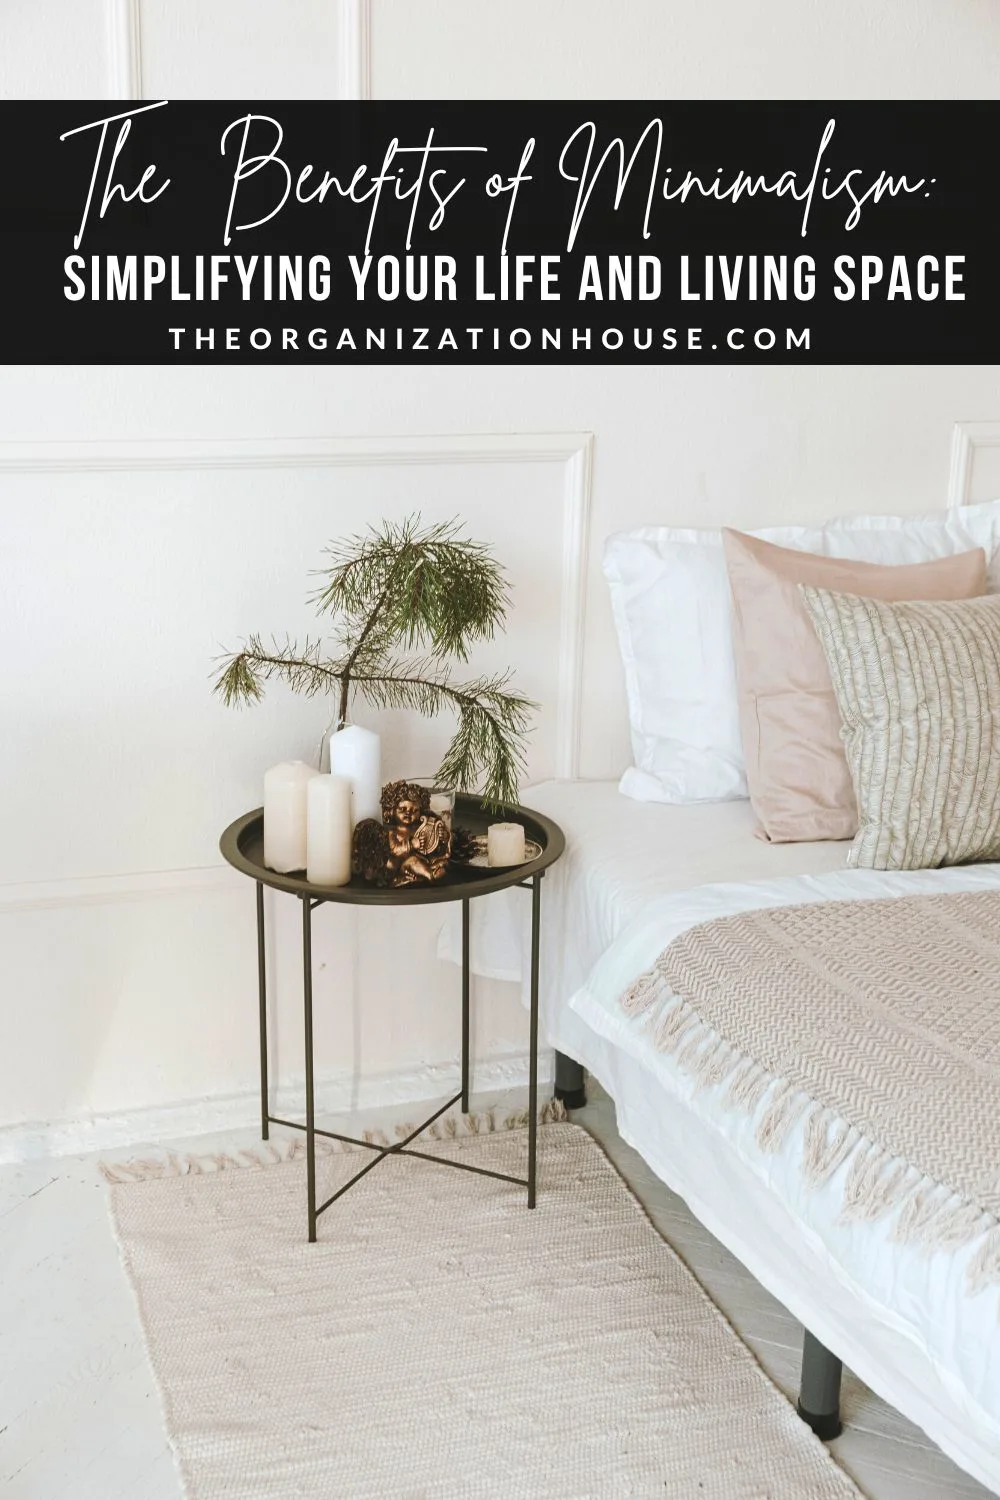 The Benefits of Minimalism Simplifying Your Life and Living Space